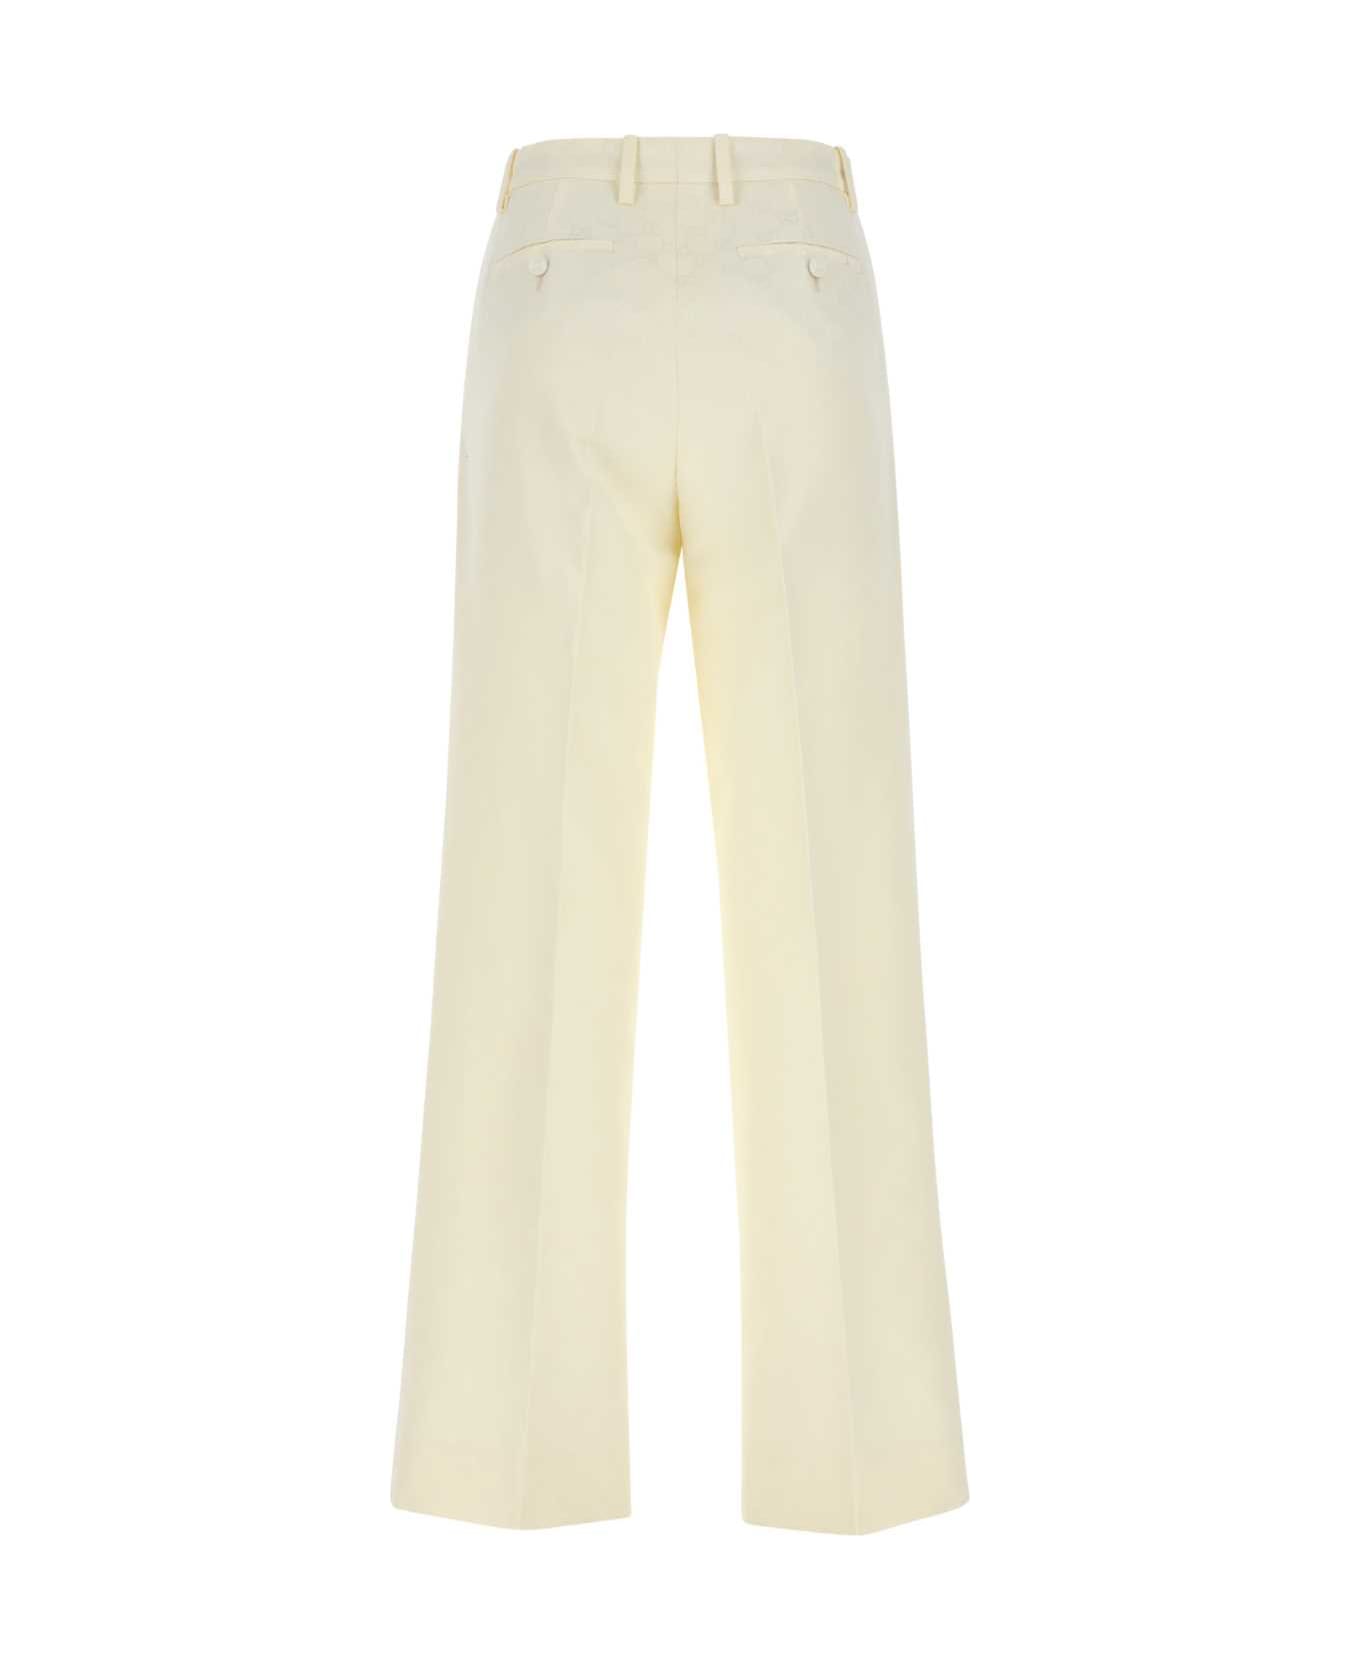 Gucci Embroidered Cotton Blend Wide-leg Pant - Beige